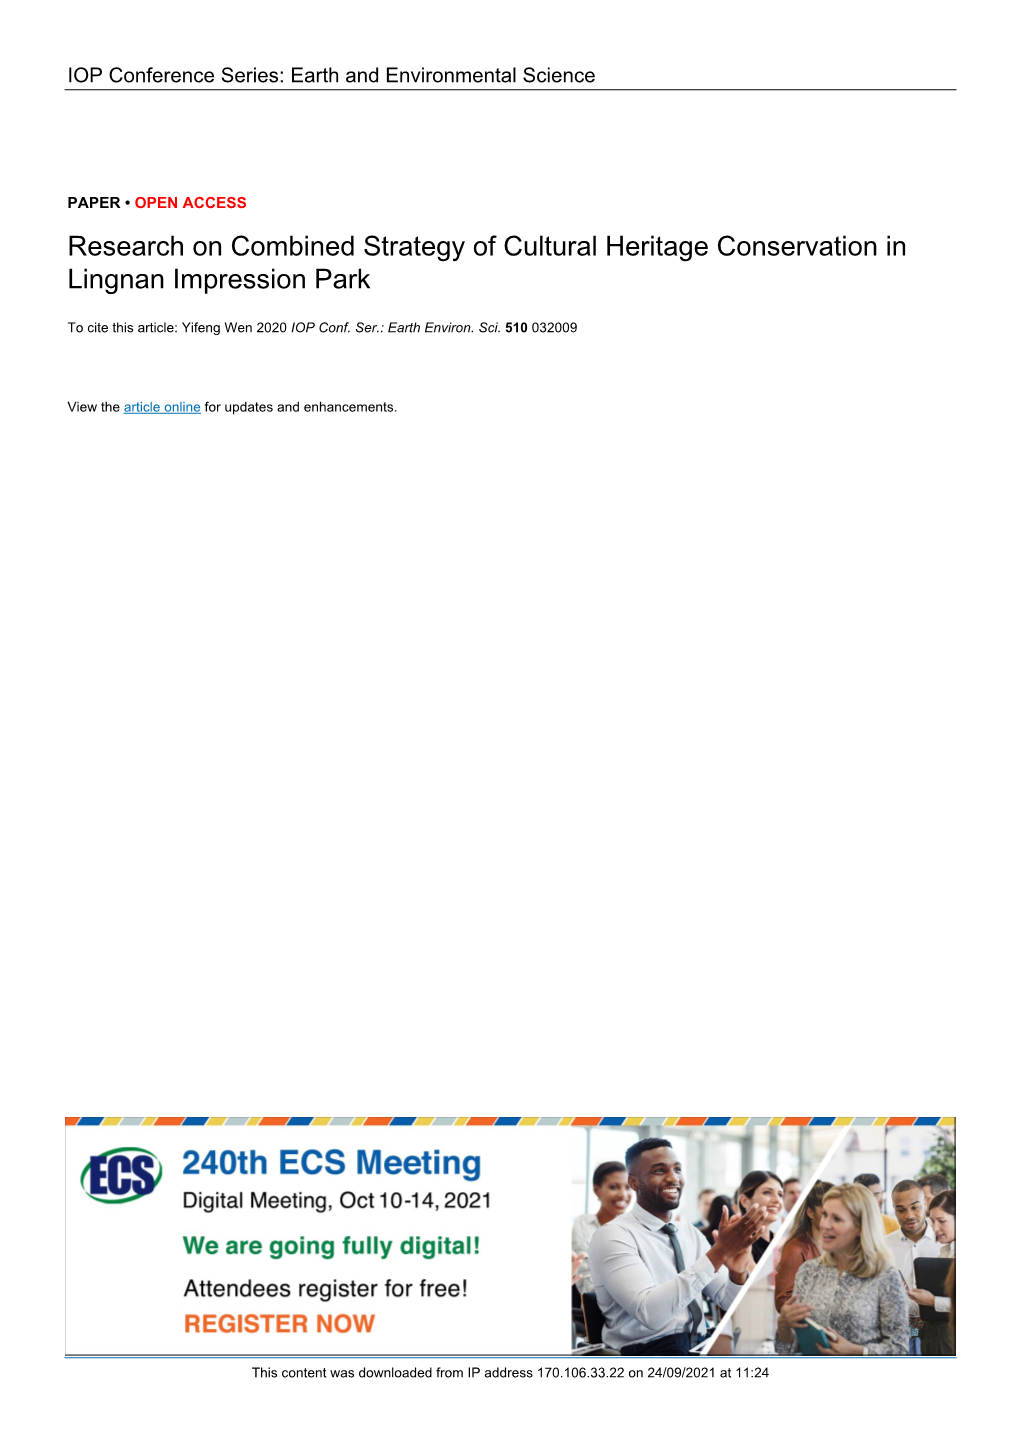 Research on Combined Strategy of Cultural Heritage Conservation in Lingnan Impression Park